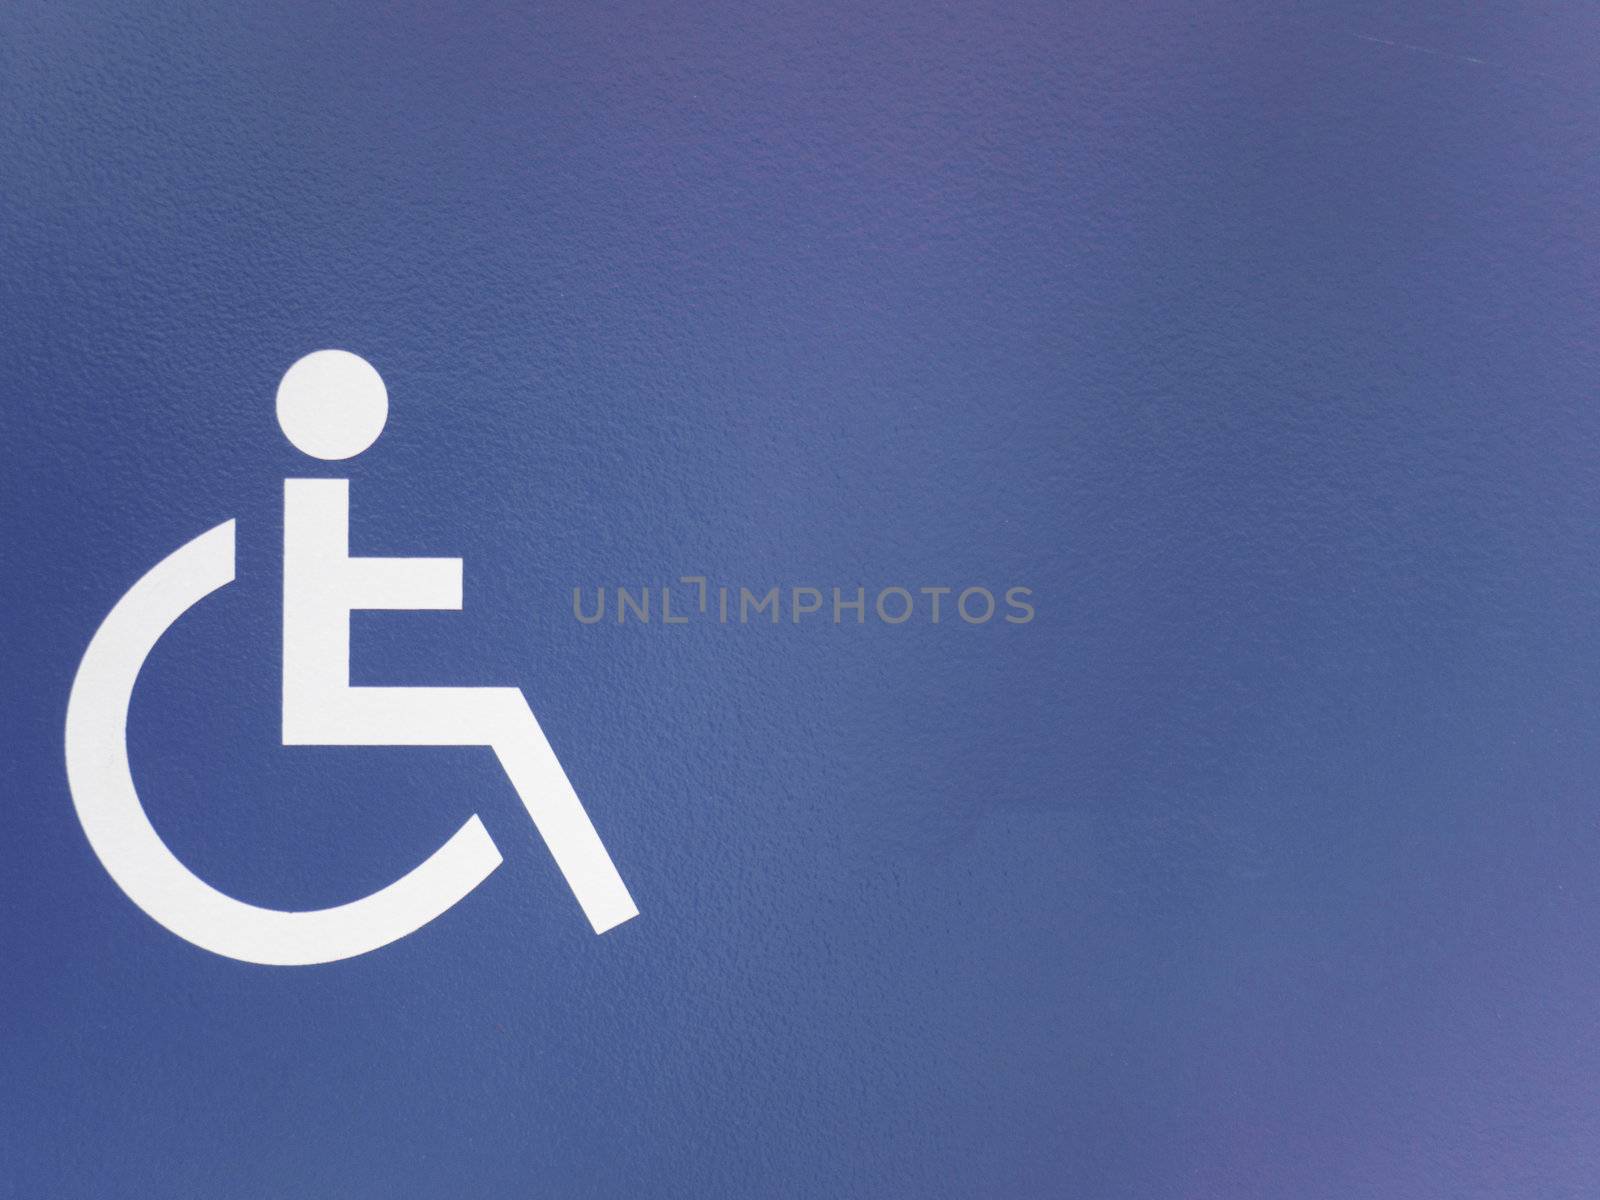 Disabled person sign in blue